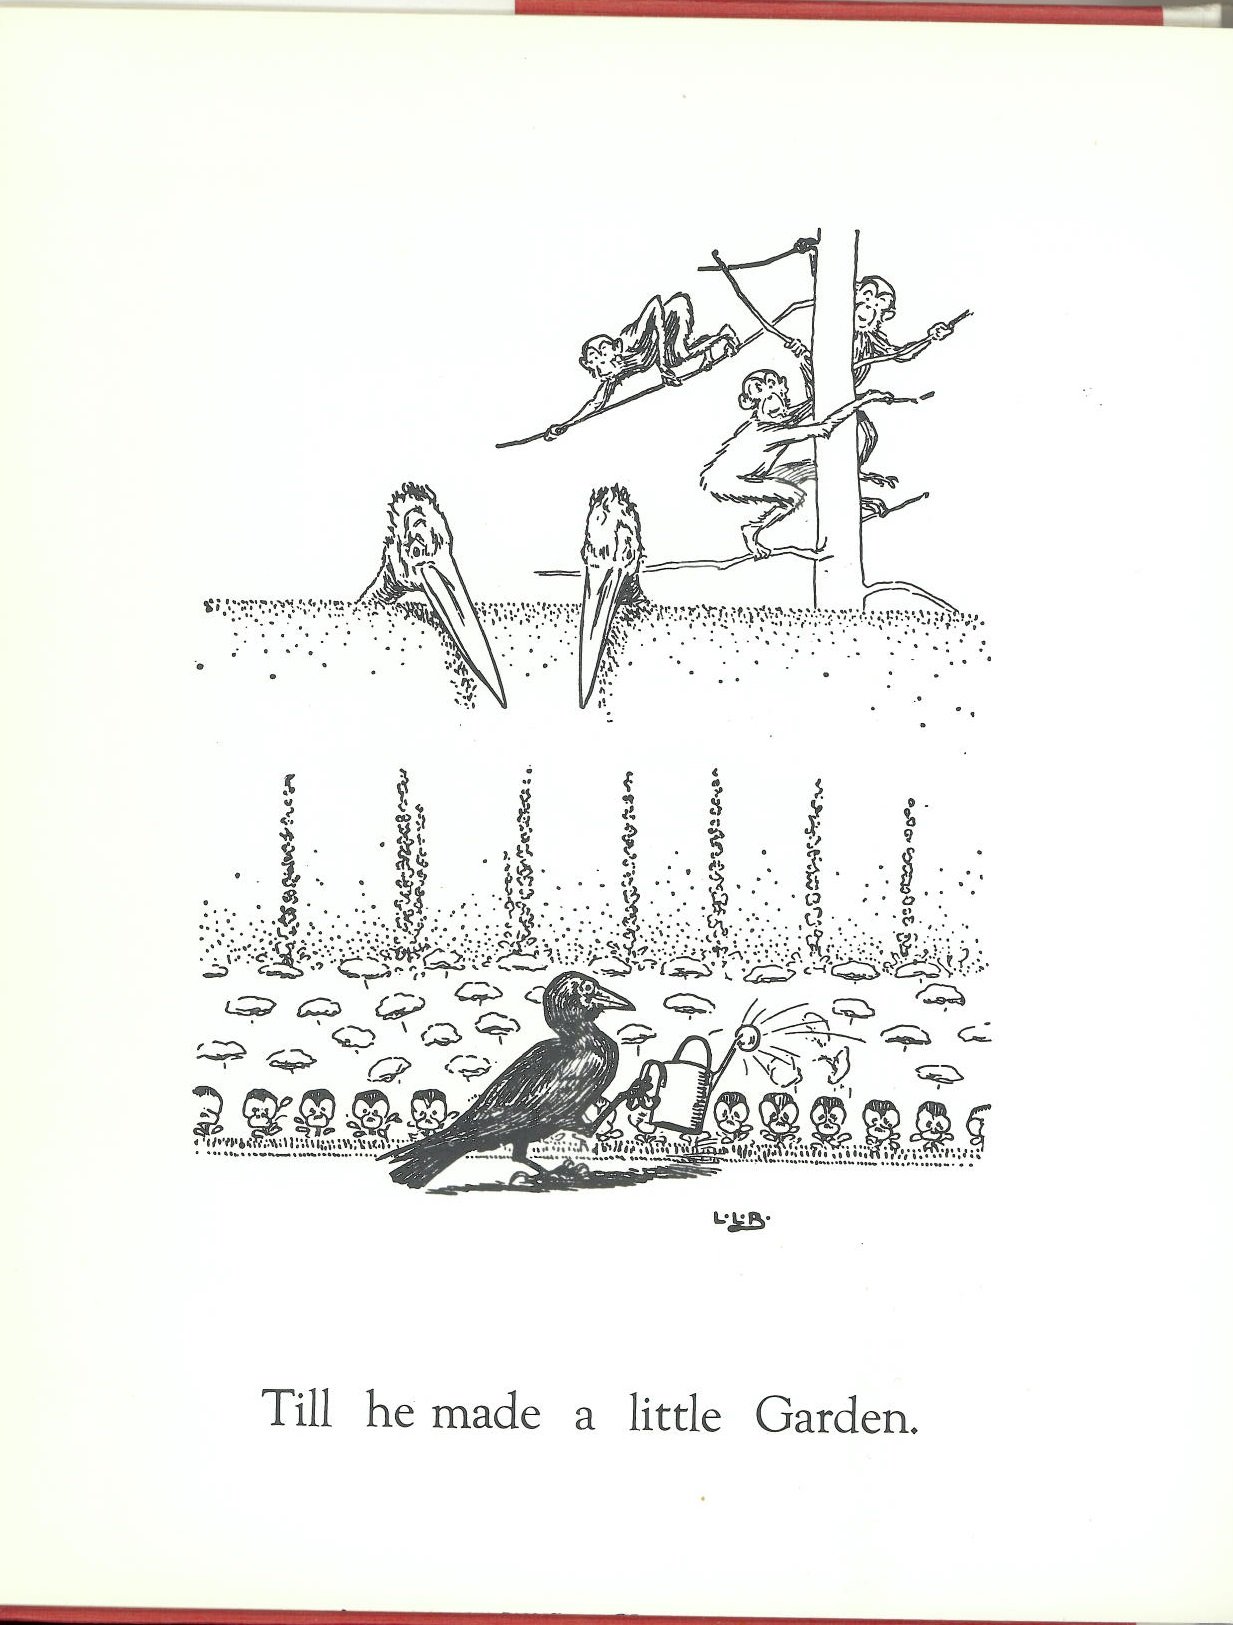 The Crow Garden by Alison Littlewood